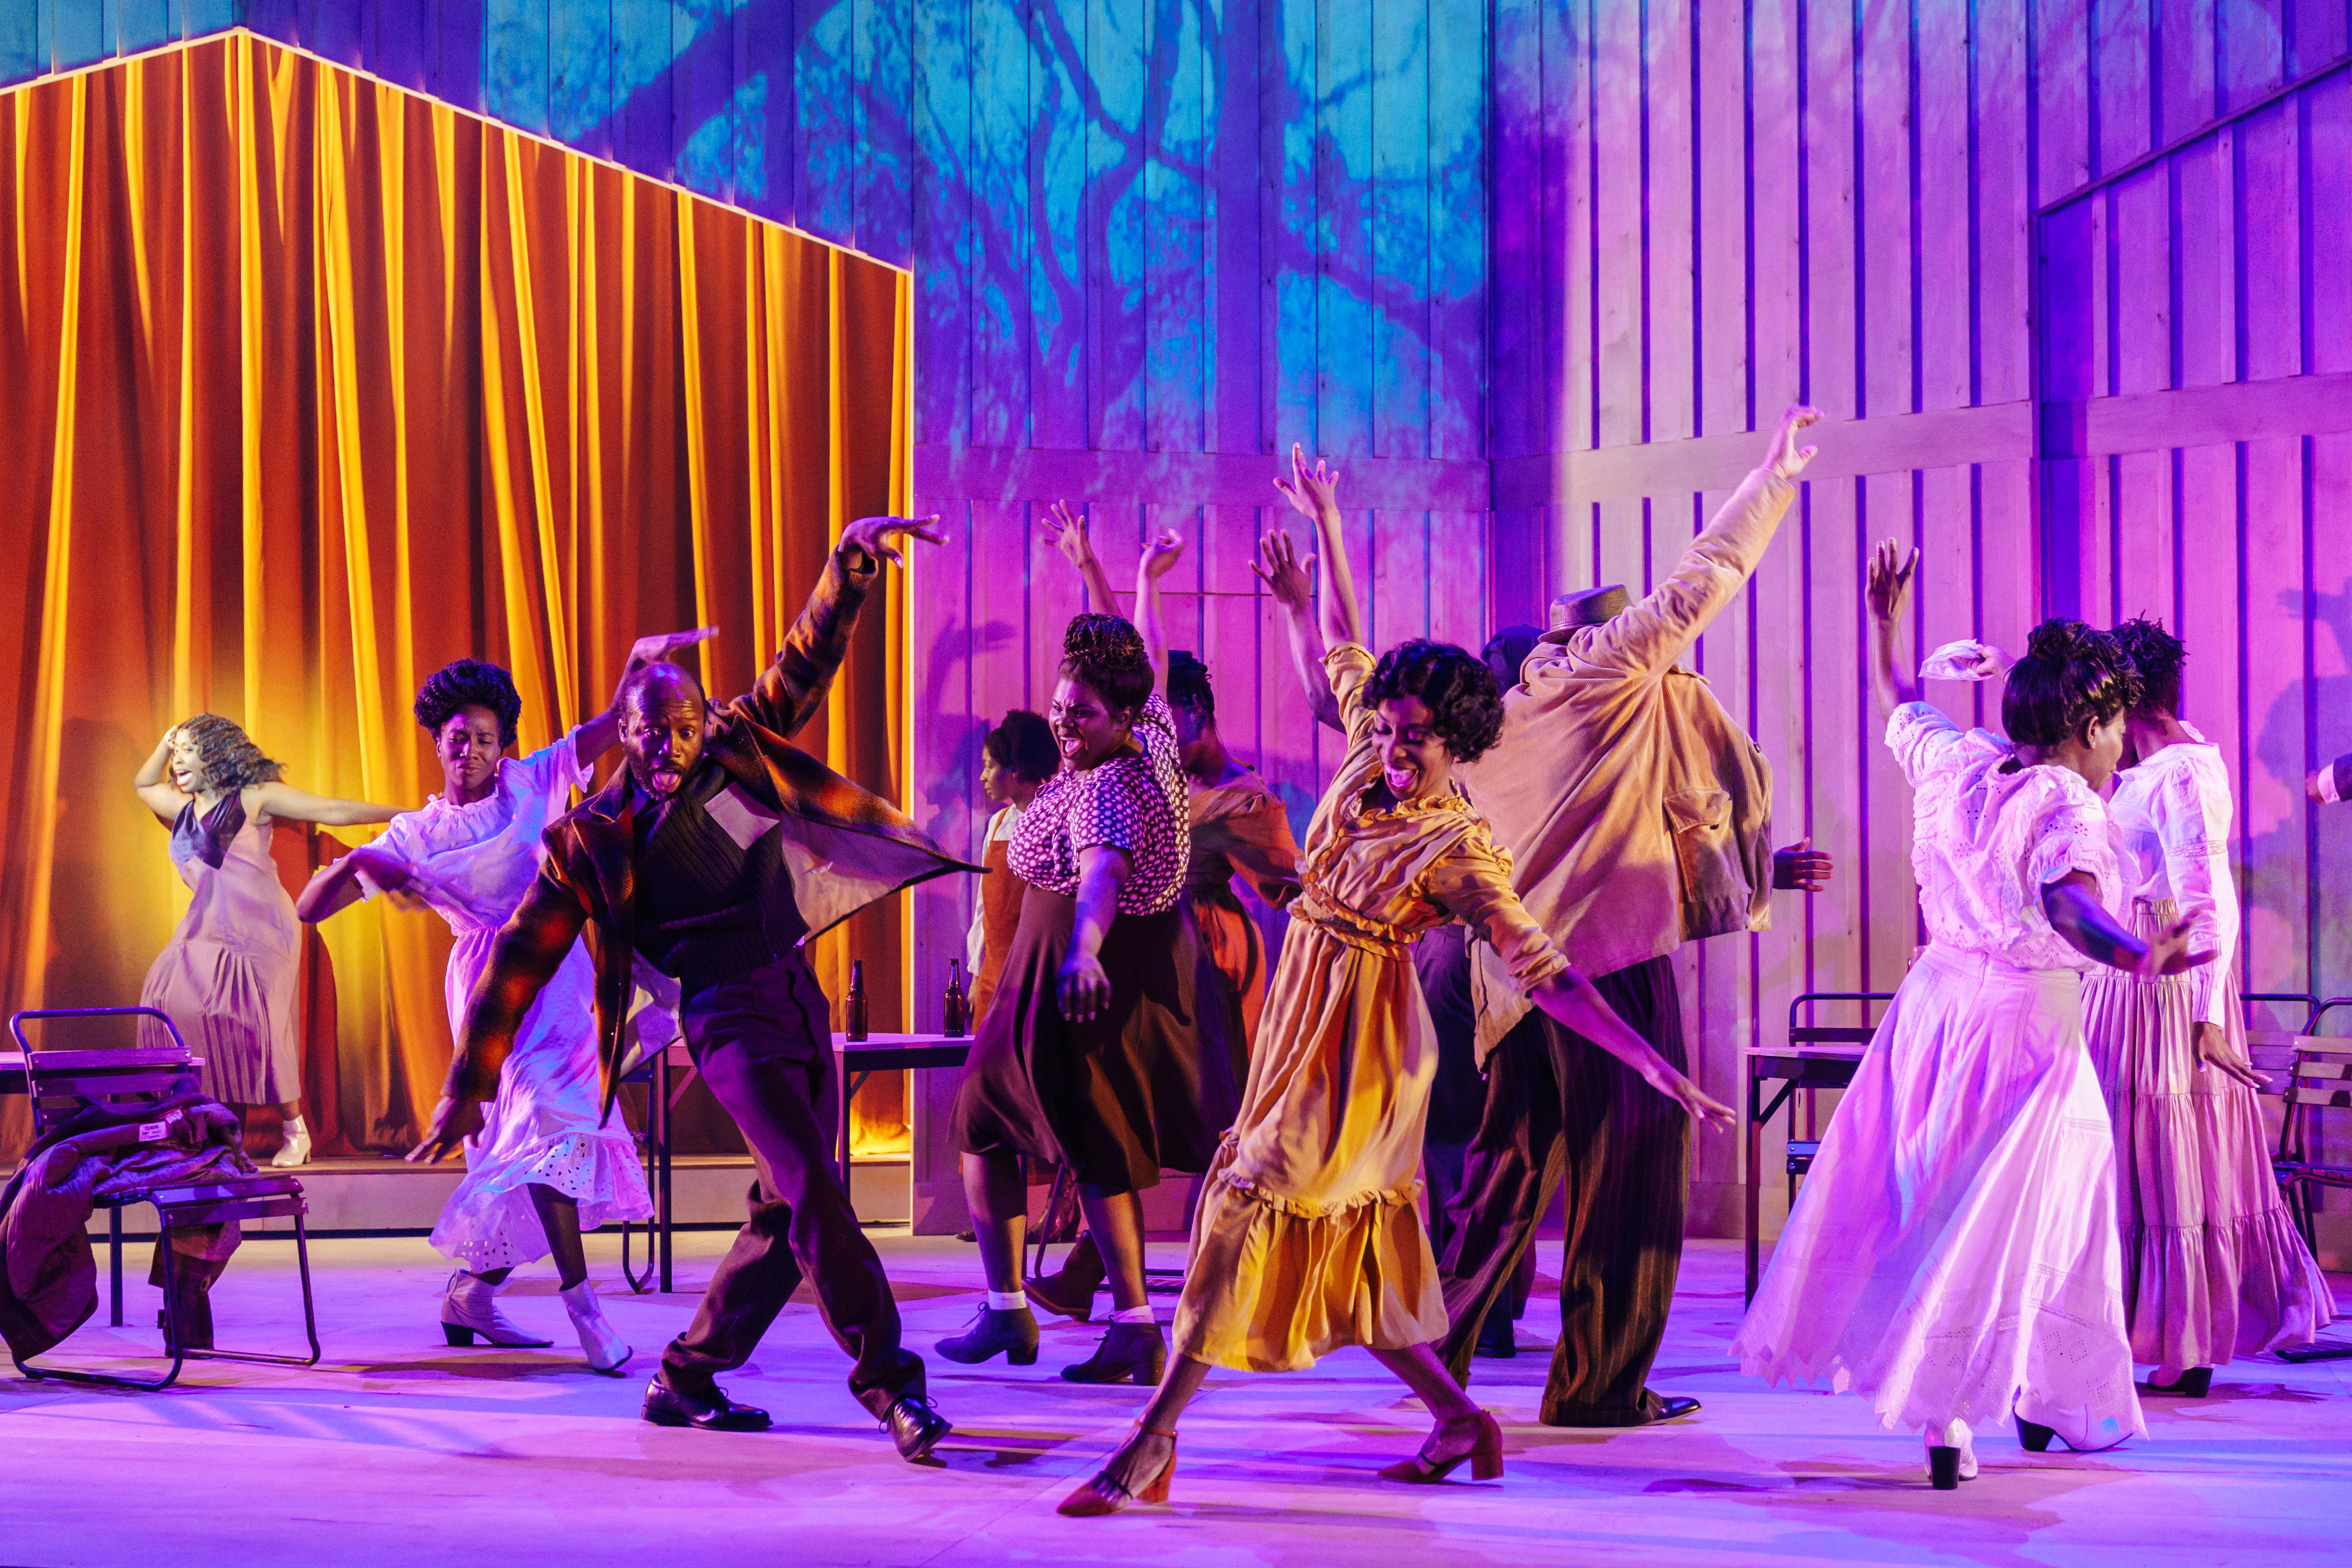 Production image from The Color Purple. The company dance in pairs on a purple and blue toned stage, with a golden curtain in the background.